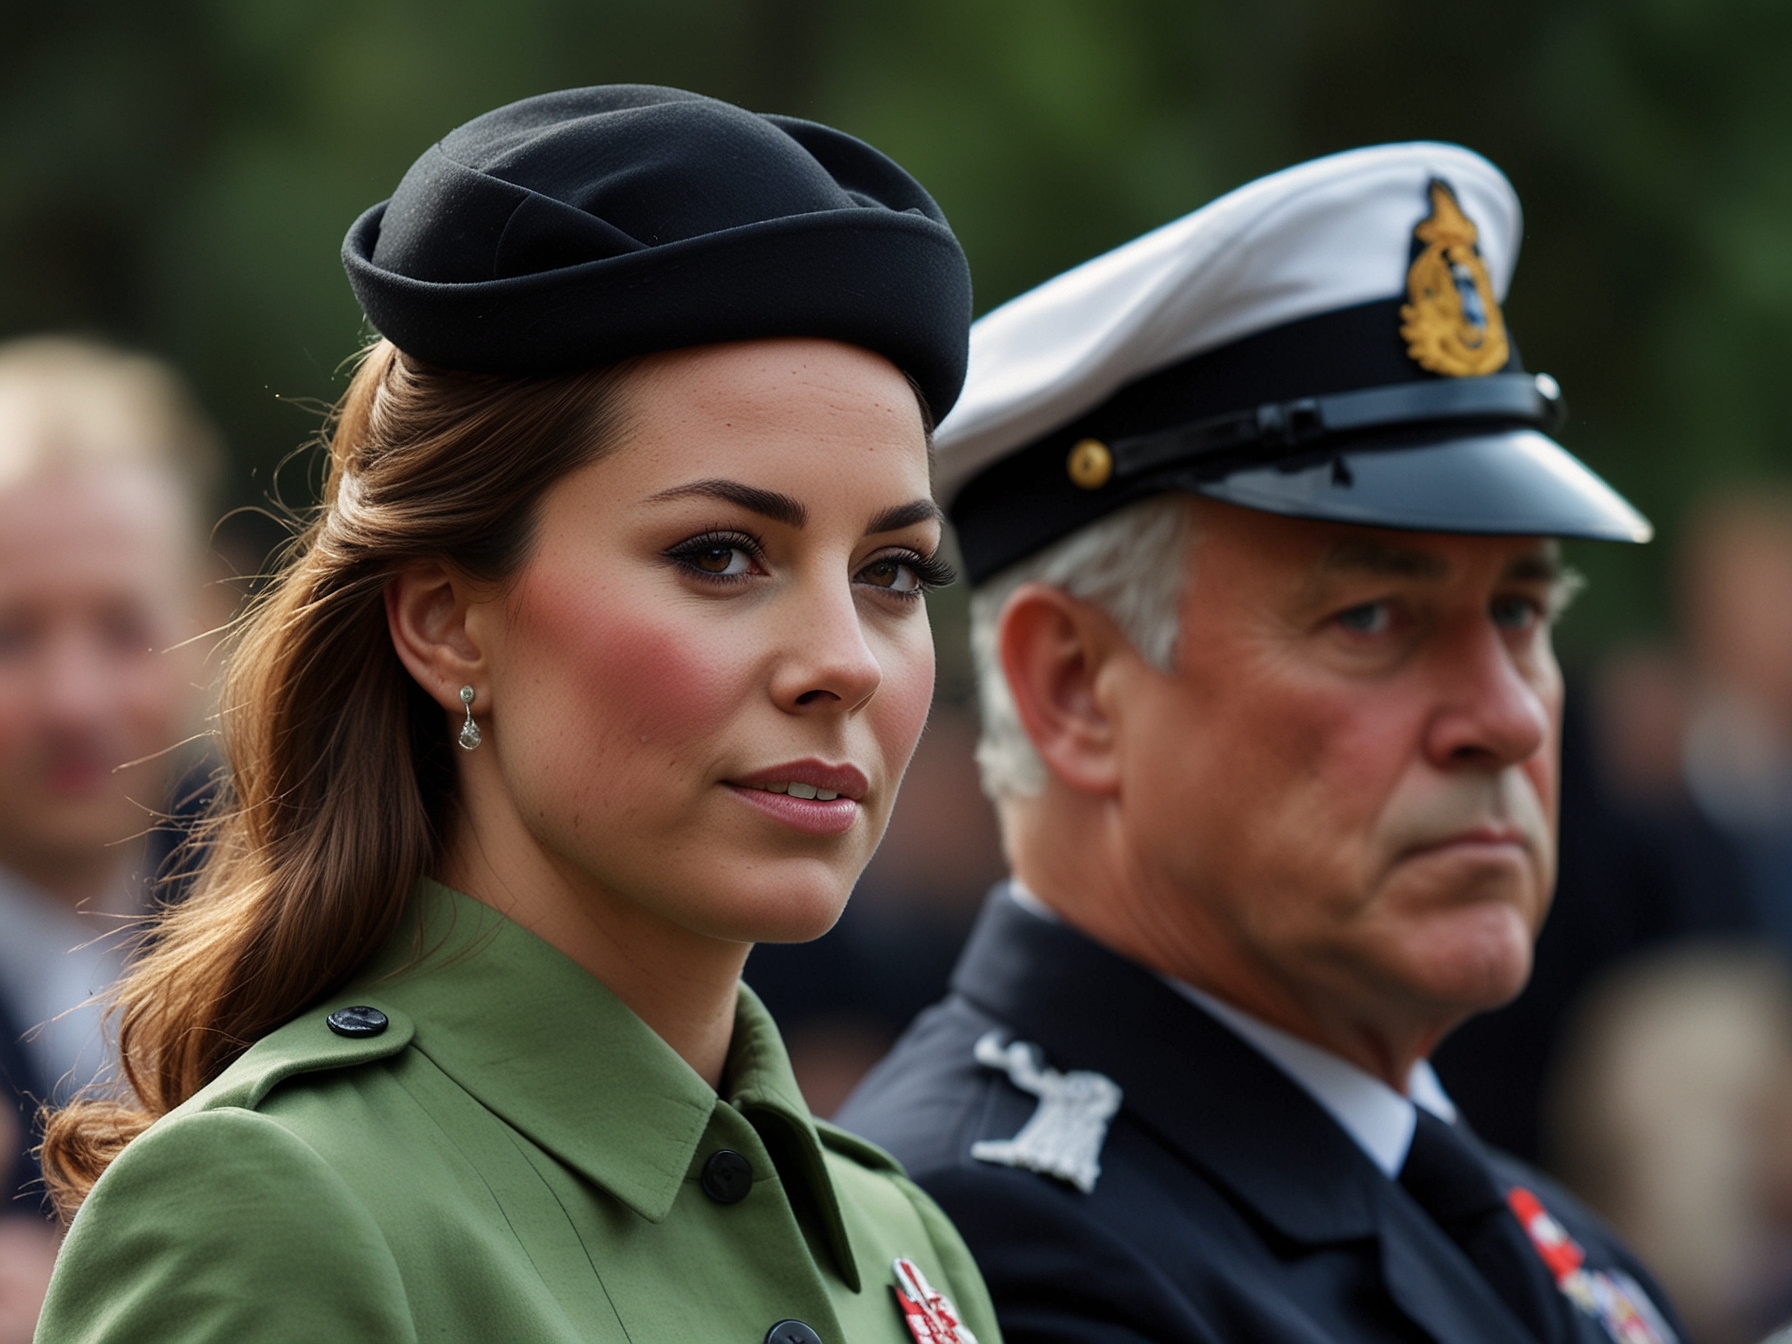 Princess Kate attending the Trooping the Colour, showcasing her resolve and commitment to royal duties despite recent chemotherapy treatments, symbolizing her public and personal strength.